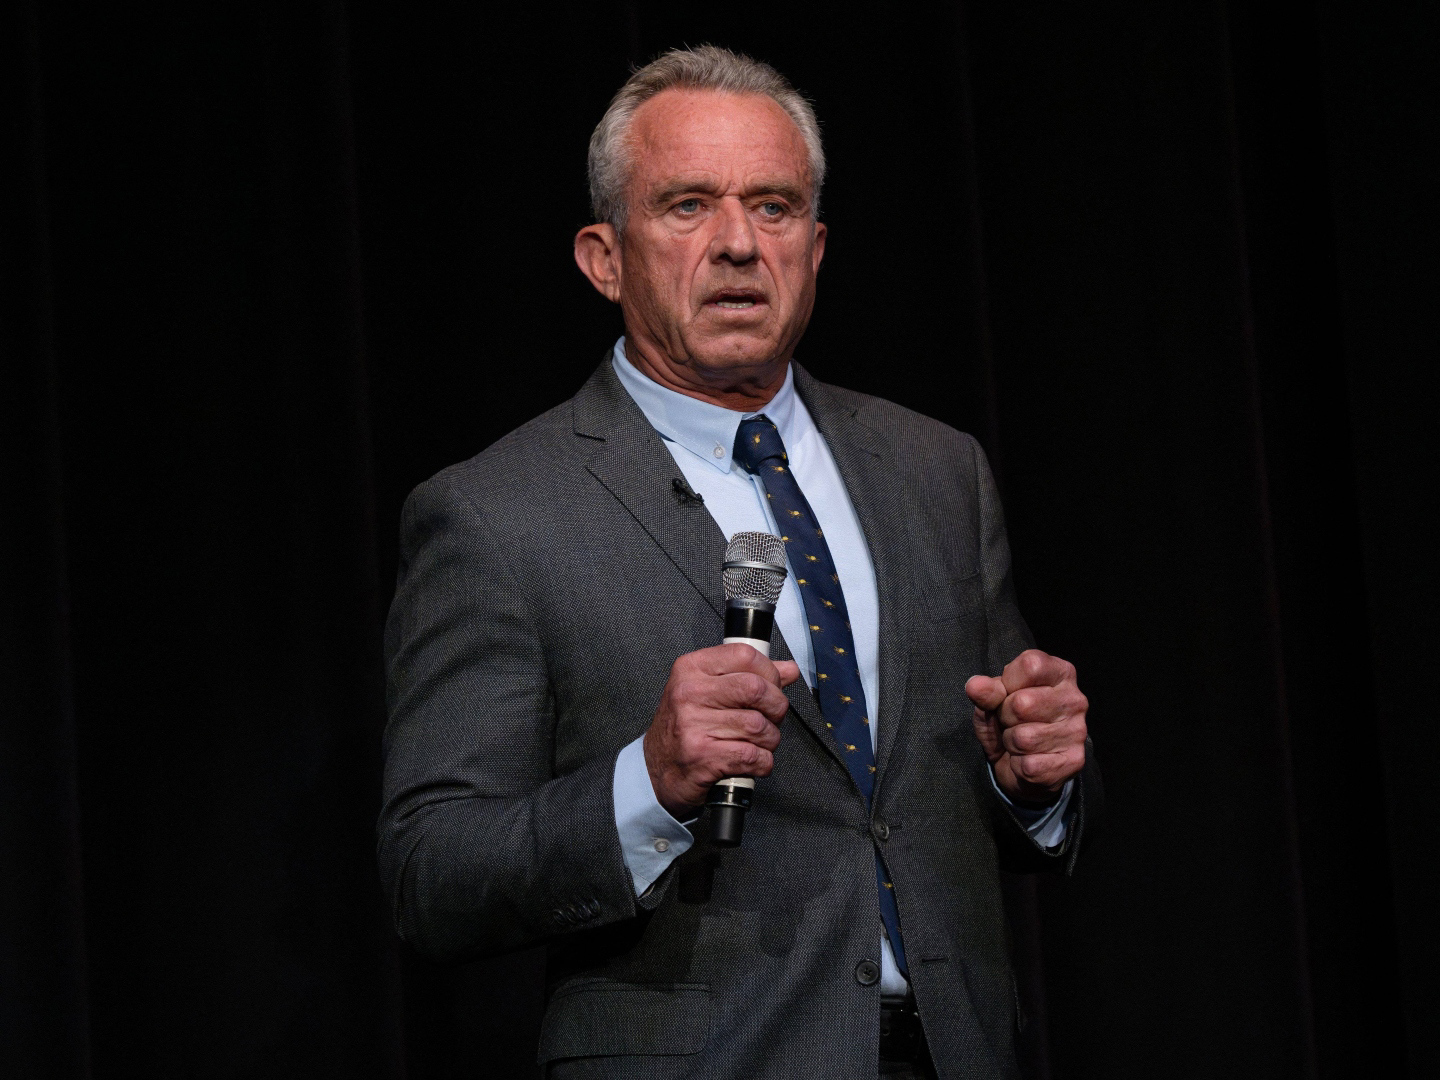 RFK Jr. Shakes Up the 2024 Presidential Election With an Intentional